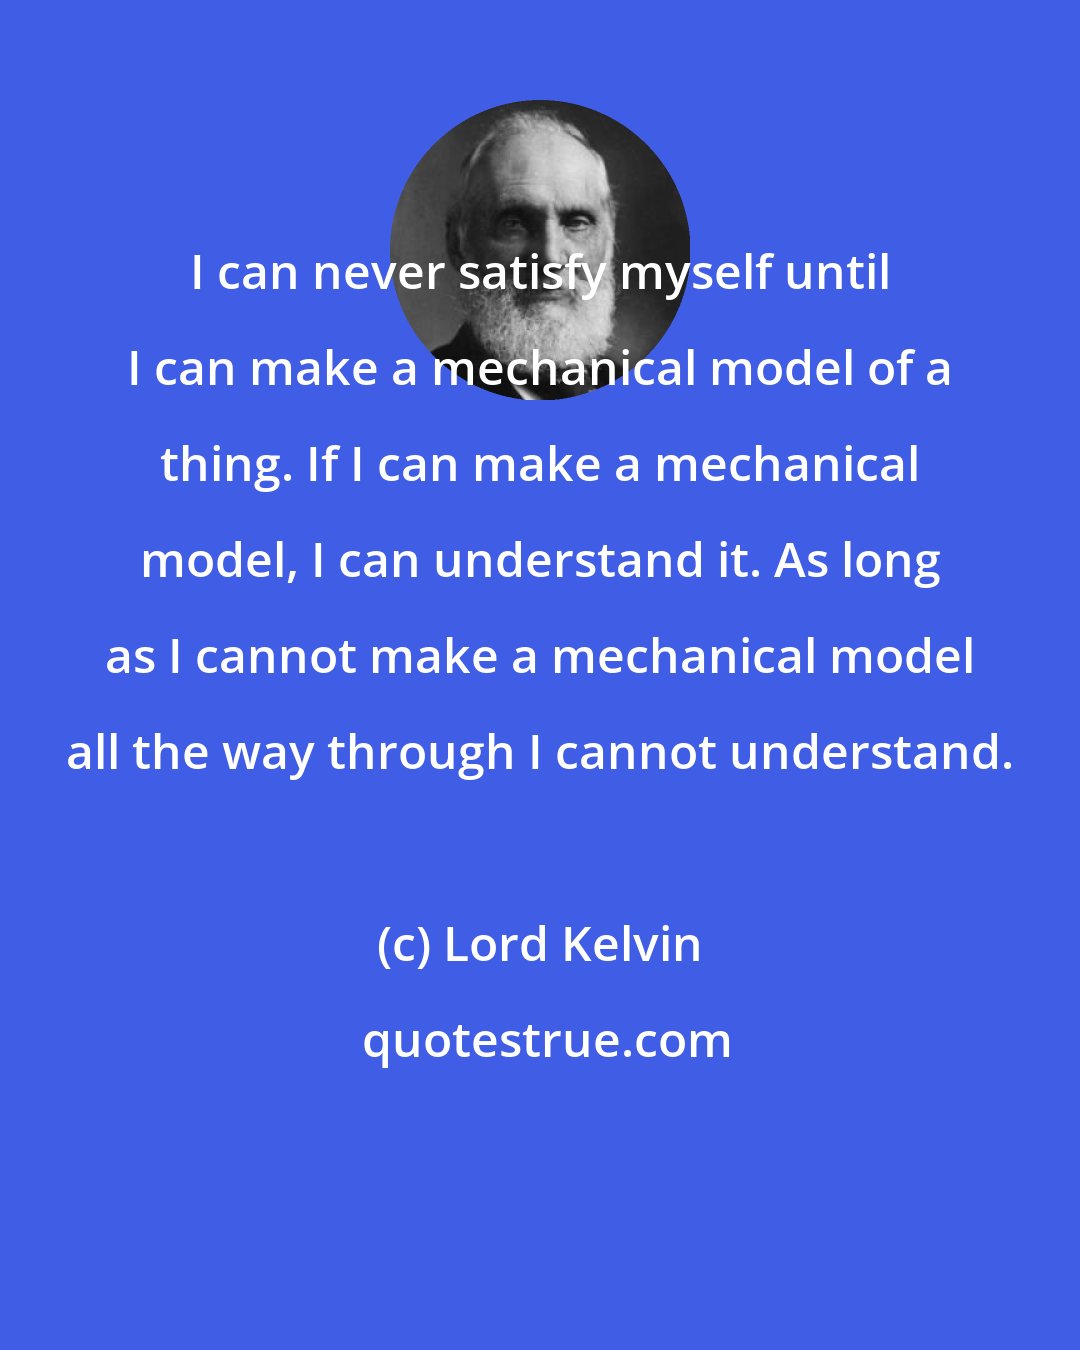 Lord Kelvin: I can never satisfy myself until I can make a mechanical model of a thing. If I can make a mechanical model, I can understand it. As long as I cannot make a mechanical model all the way through I cannot understand.